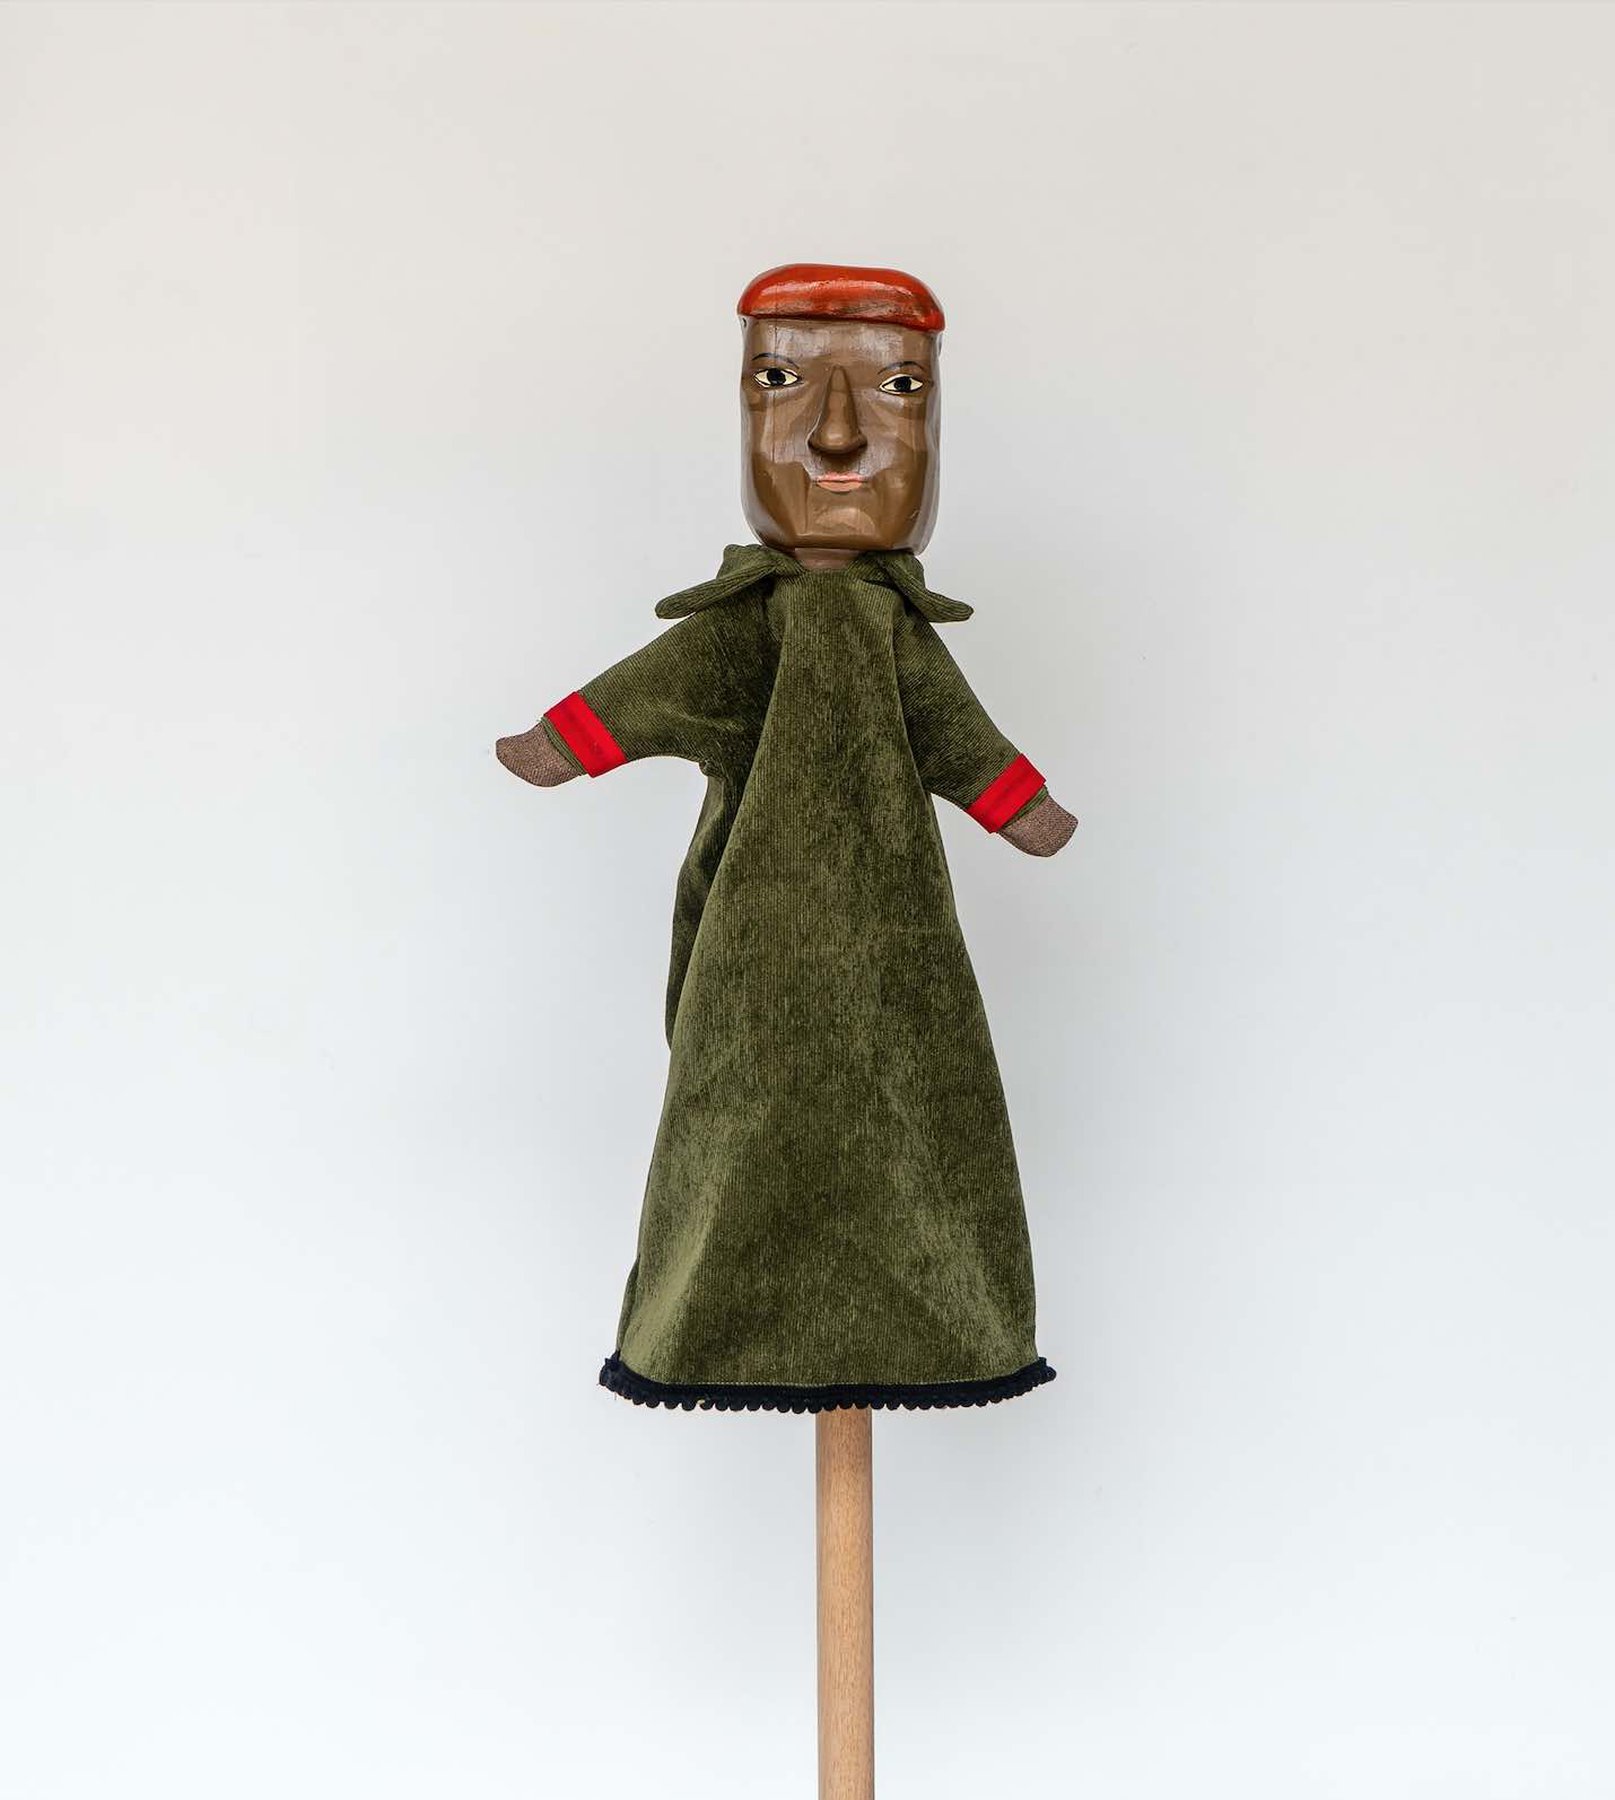 Daniela Ortiz, The Brightness of Greedy Europe, 2022, wood hand-carved, sewn, knitted and embroidered costumes (25 cm) puppet - Hugo Chávez